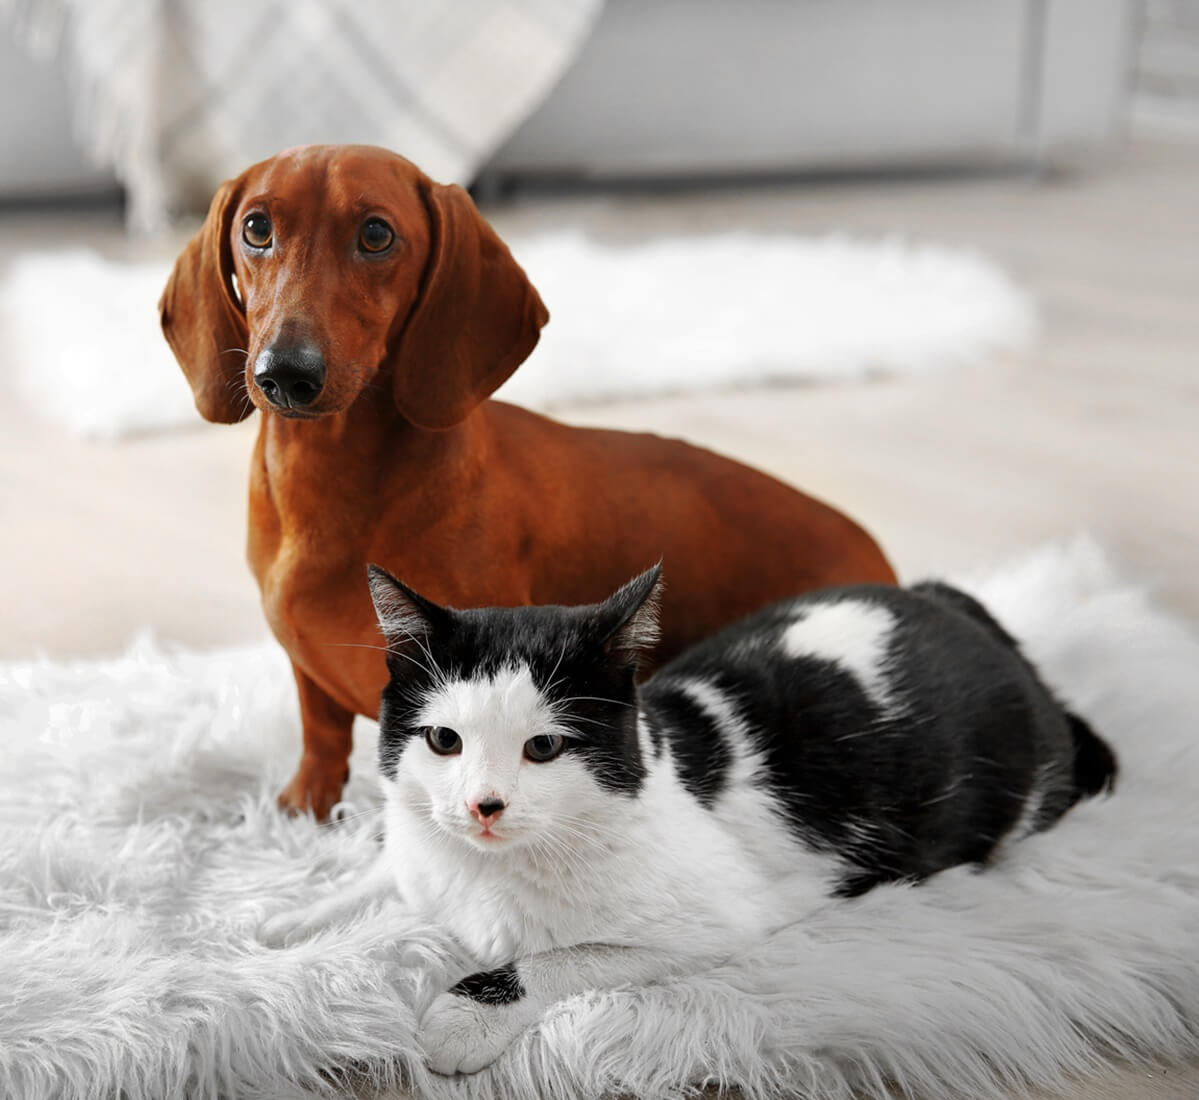 dog and cat on a rug